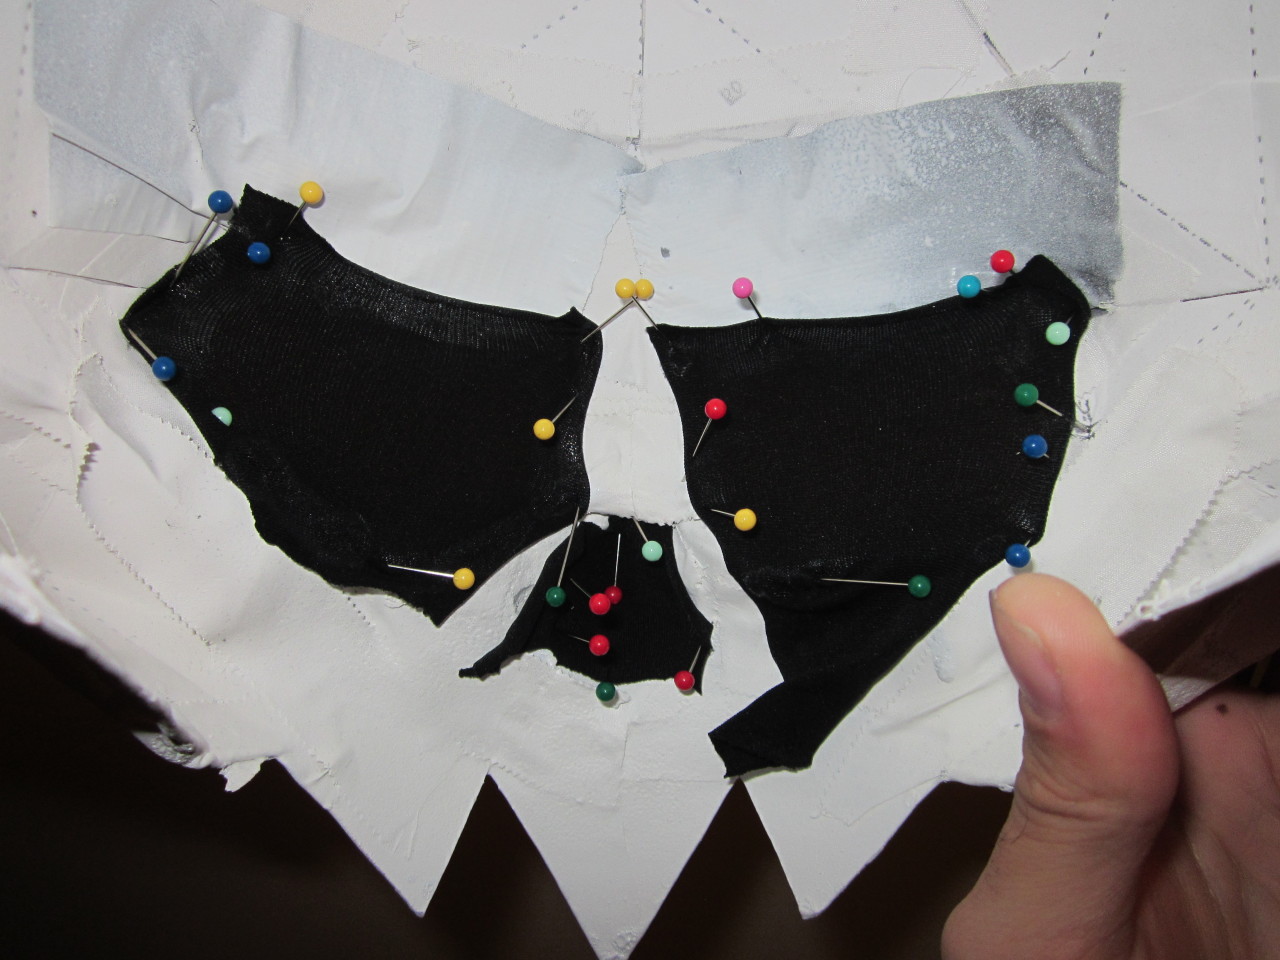 The inside of the skull, showing the eye and nose holes covered by black fabric pinned in place with colorful sewing pins.